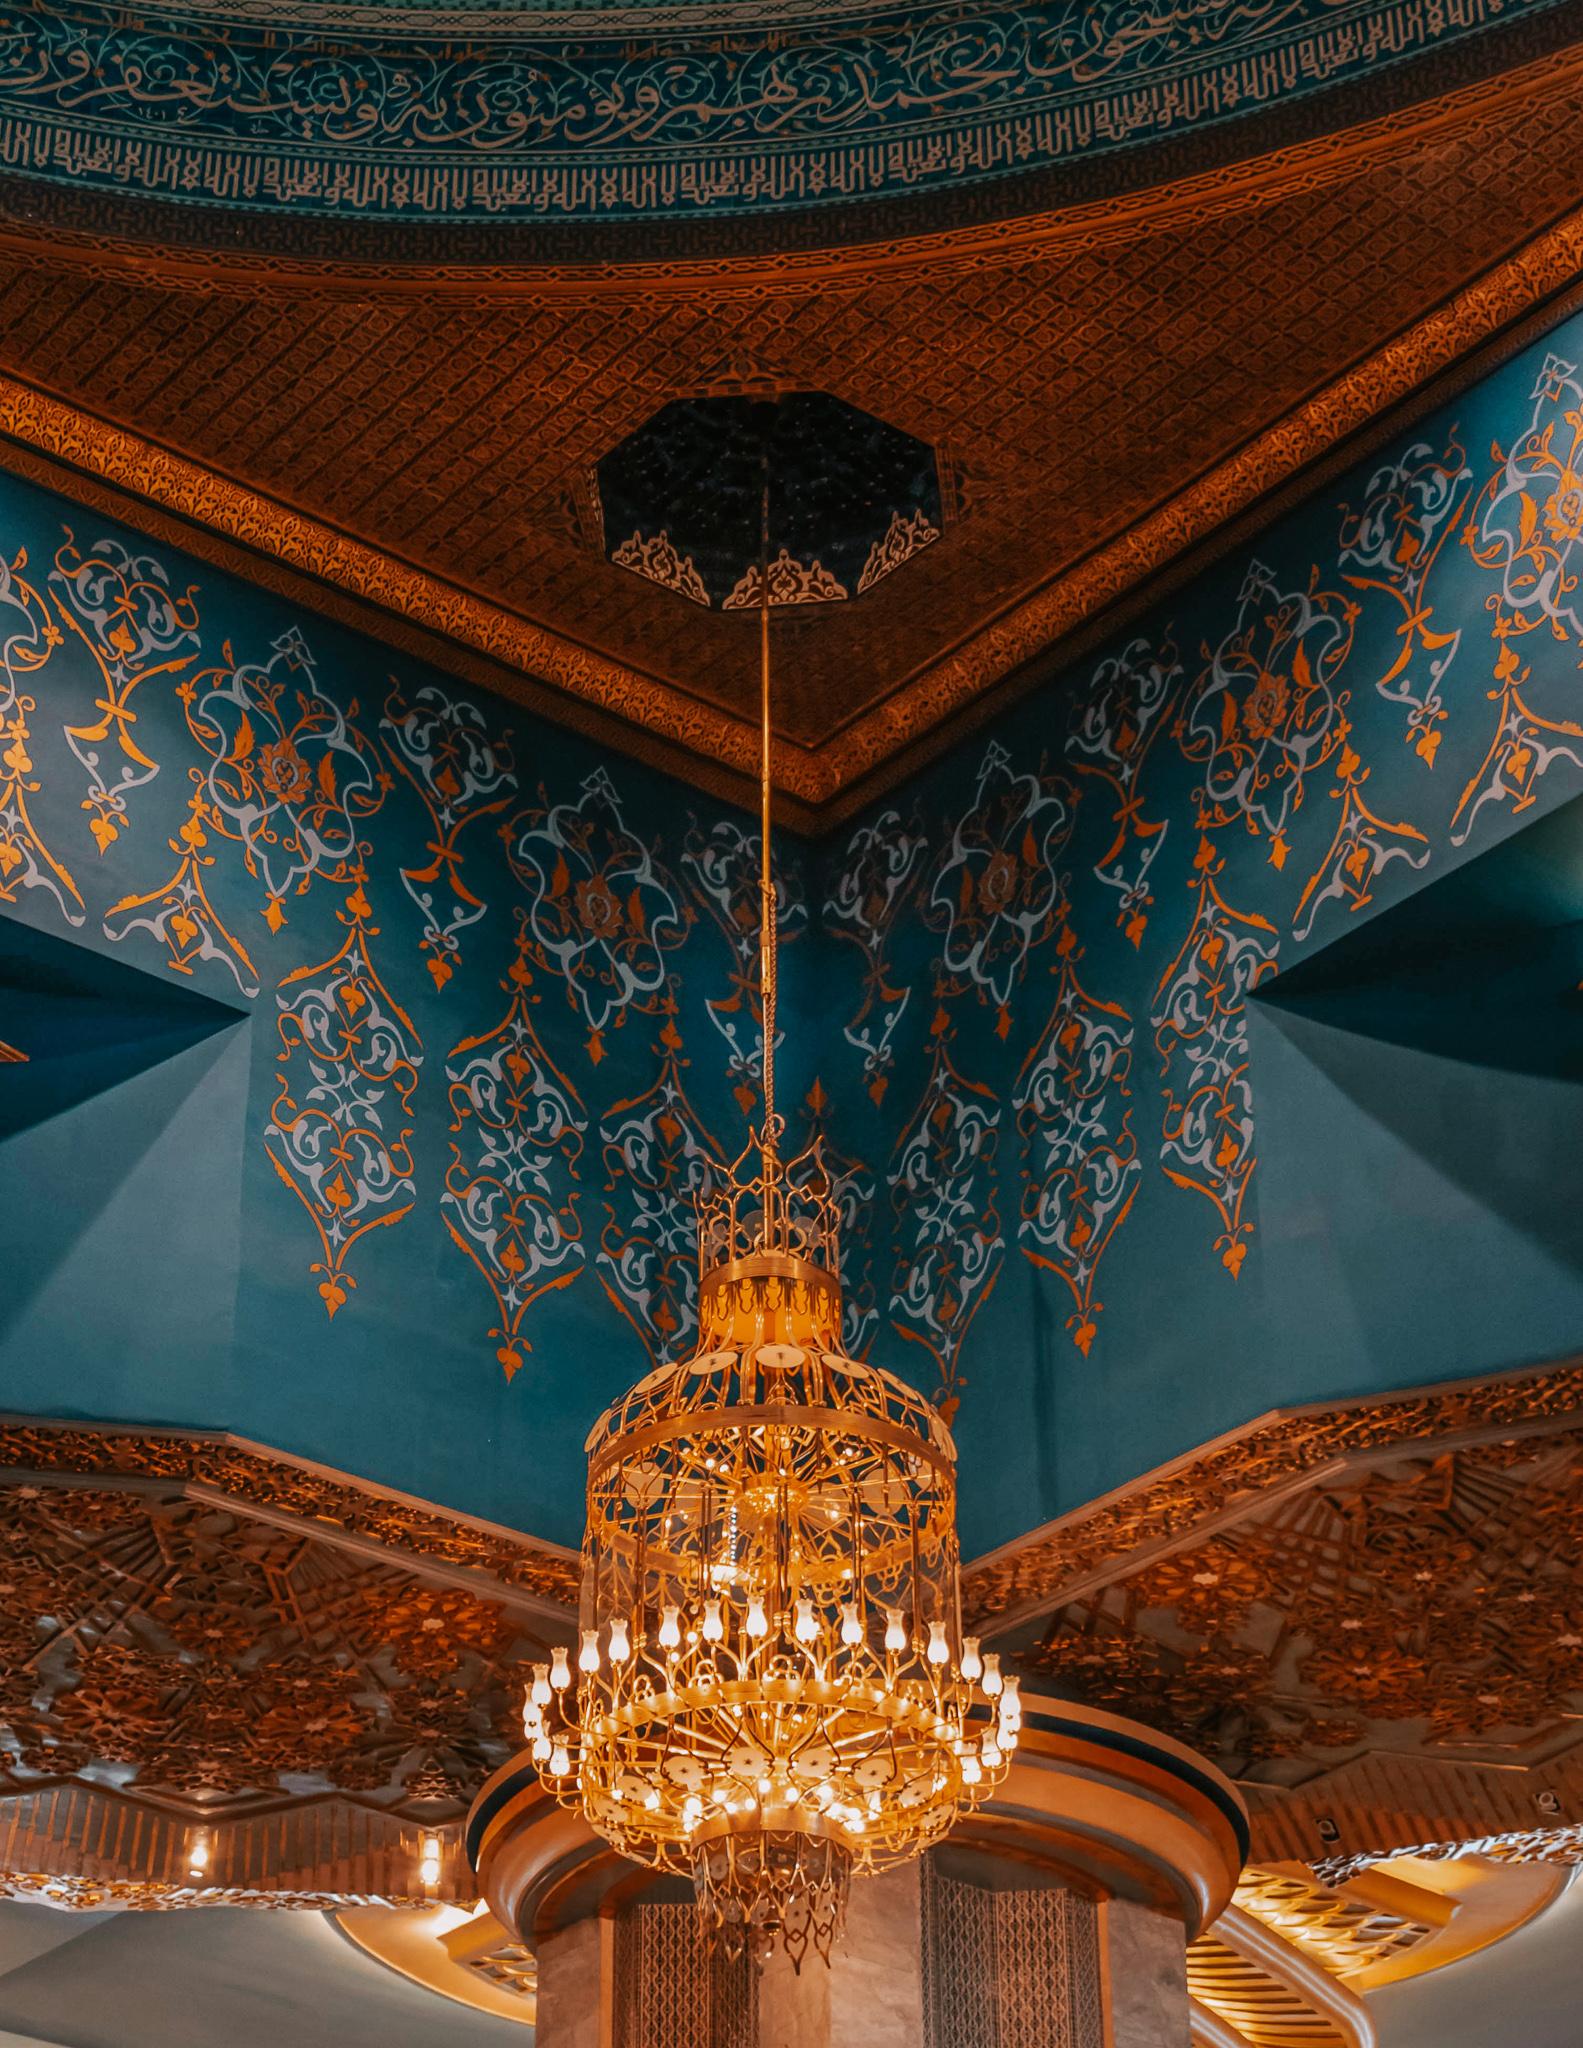 A golden chandelier in the grand mosque of Kuwait